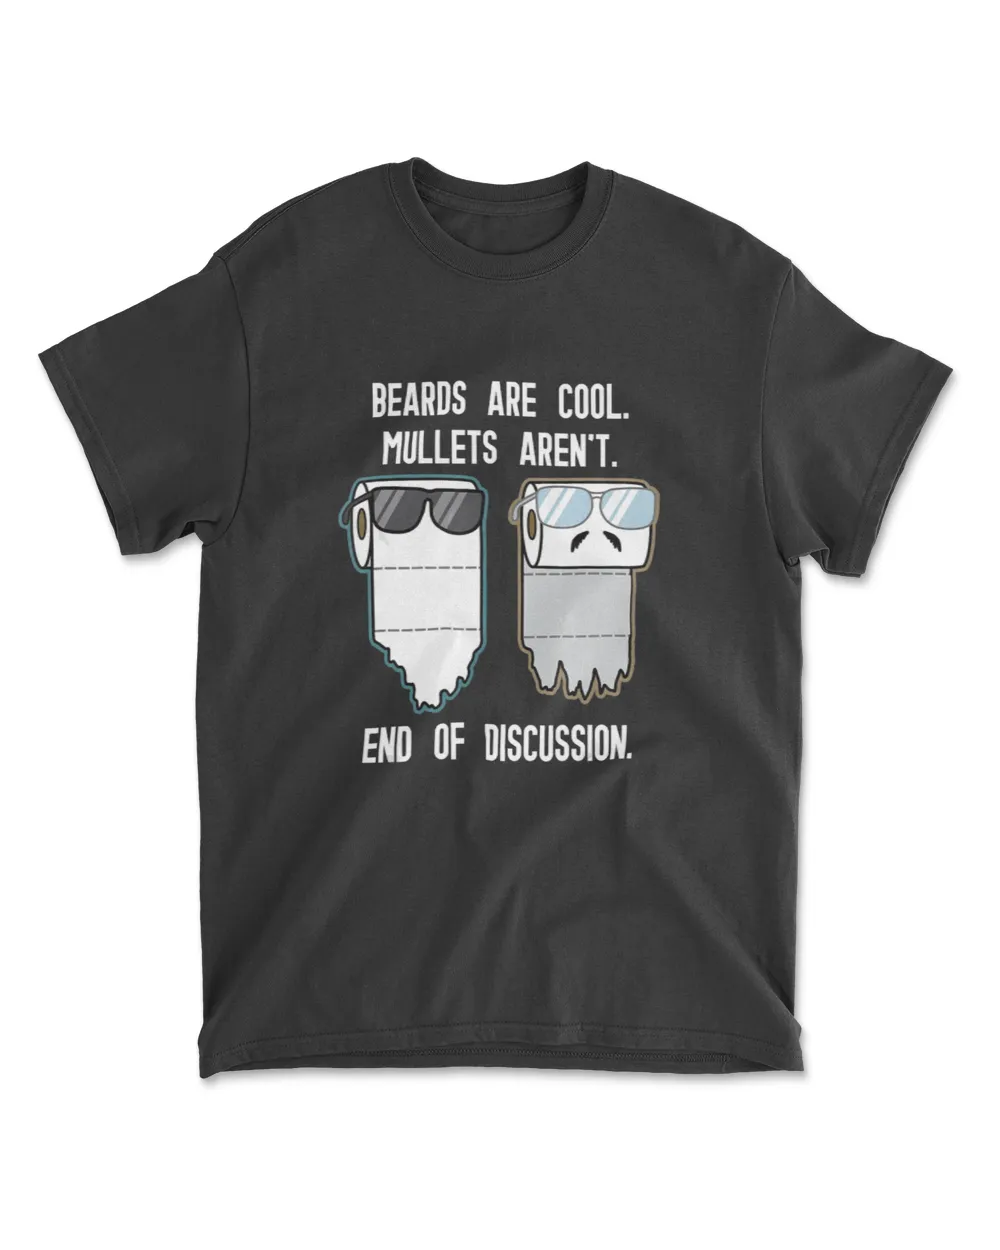 Beards are Cool. Mullets Arent. Toilet Paper Roll Debate T-Shirt